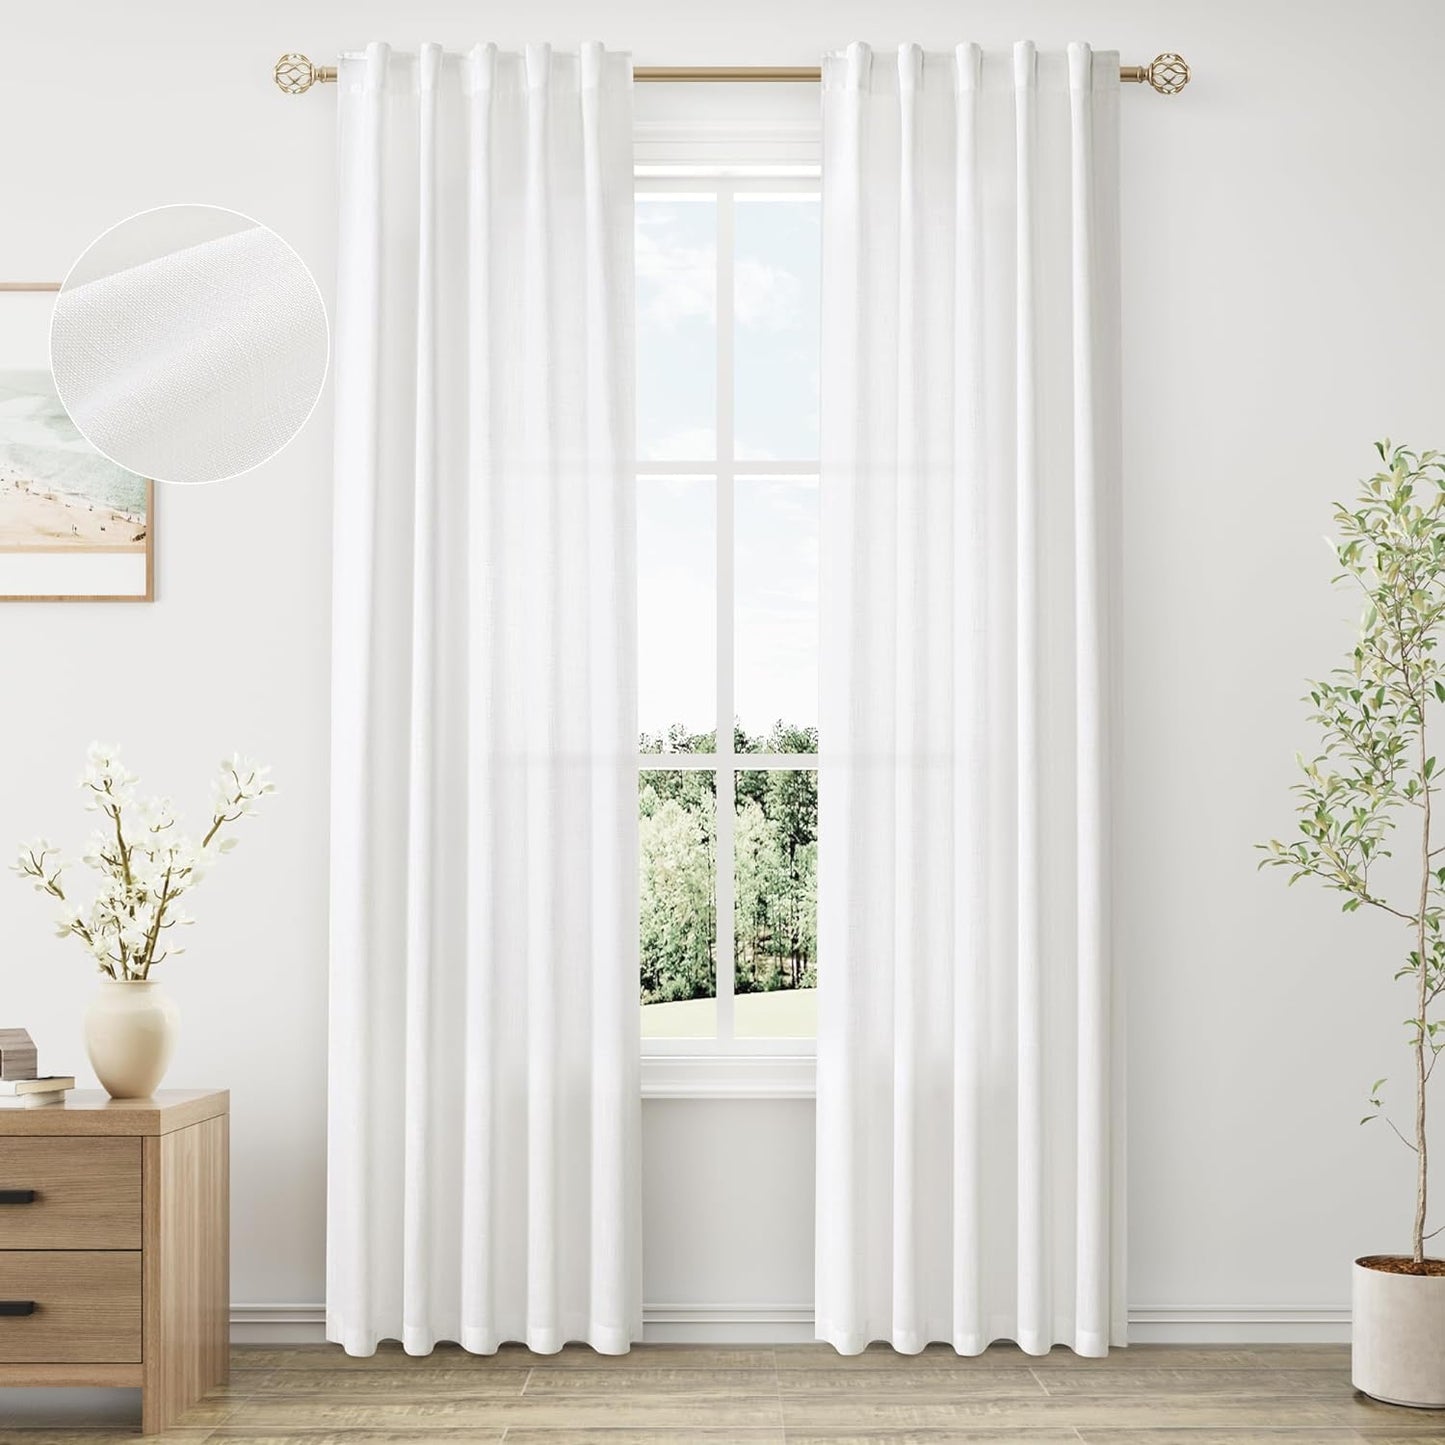 Natural Linen Sheer Curtains 84 Inch Long for Living Room Bedroom Back Tab Light Filtering Privacy Farmhouse Rod Pocket Ivory off White Neutral Drapes with Hooks 2 Panels Cream Beige  SPWIY White 40W X 80L Inch X 2 Panels 